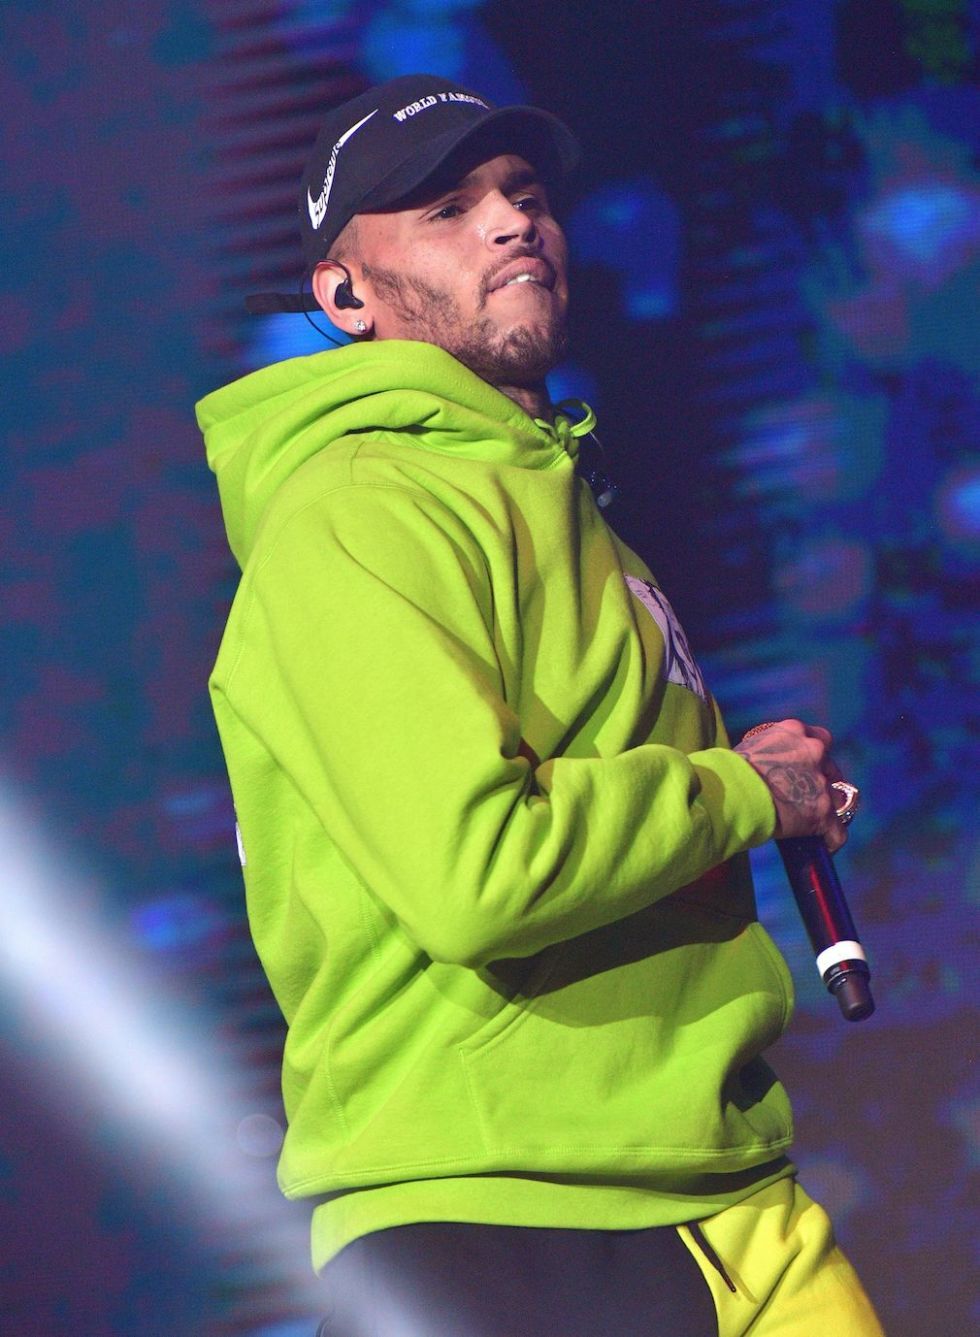 Chris Brown performs at Winterfest 2017 at Philips Arena